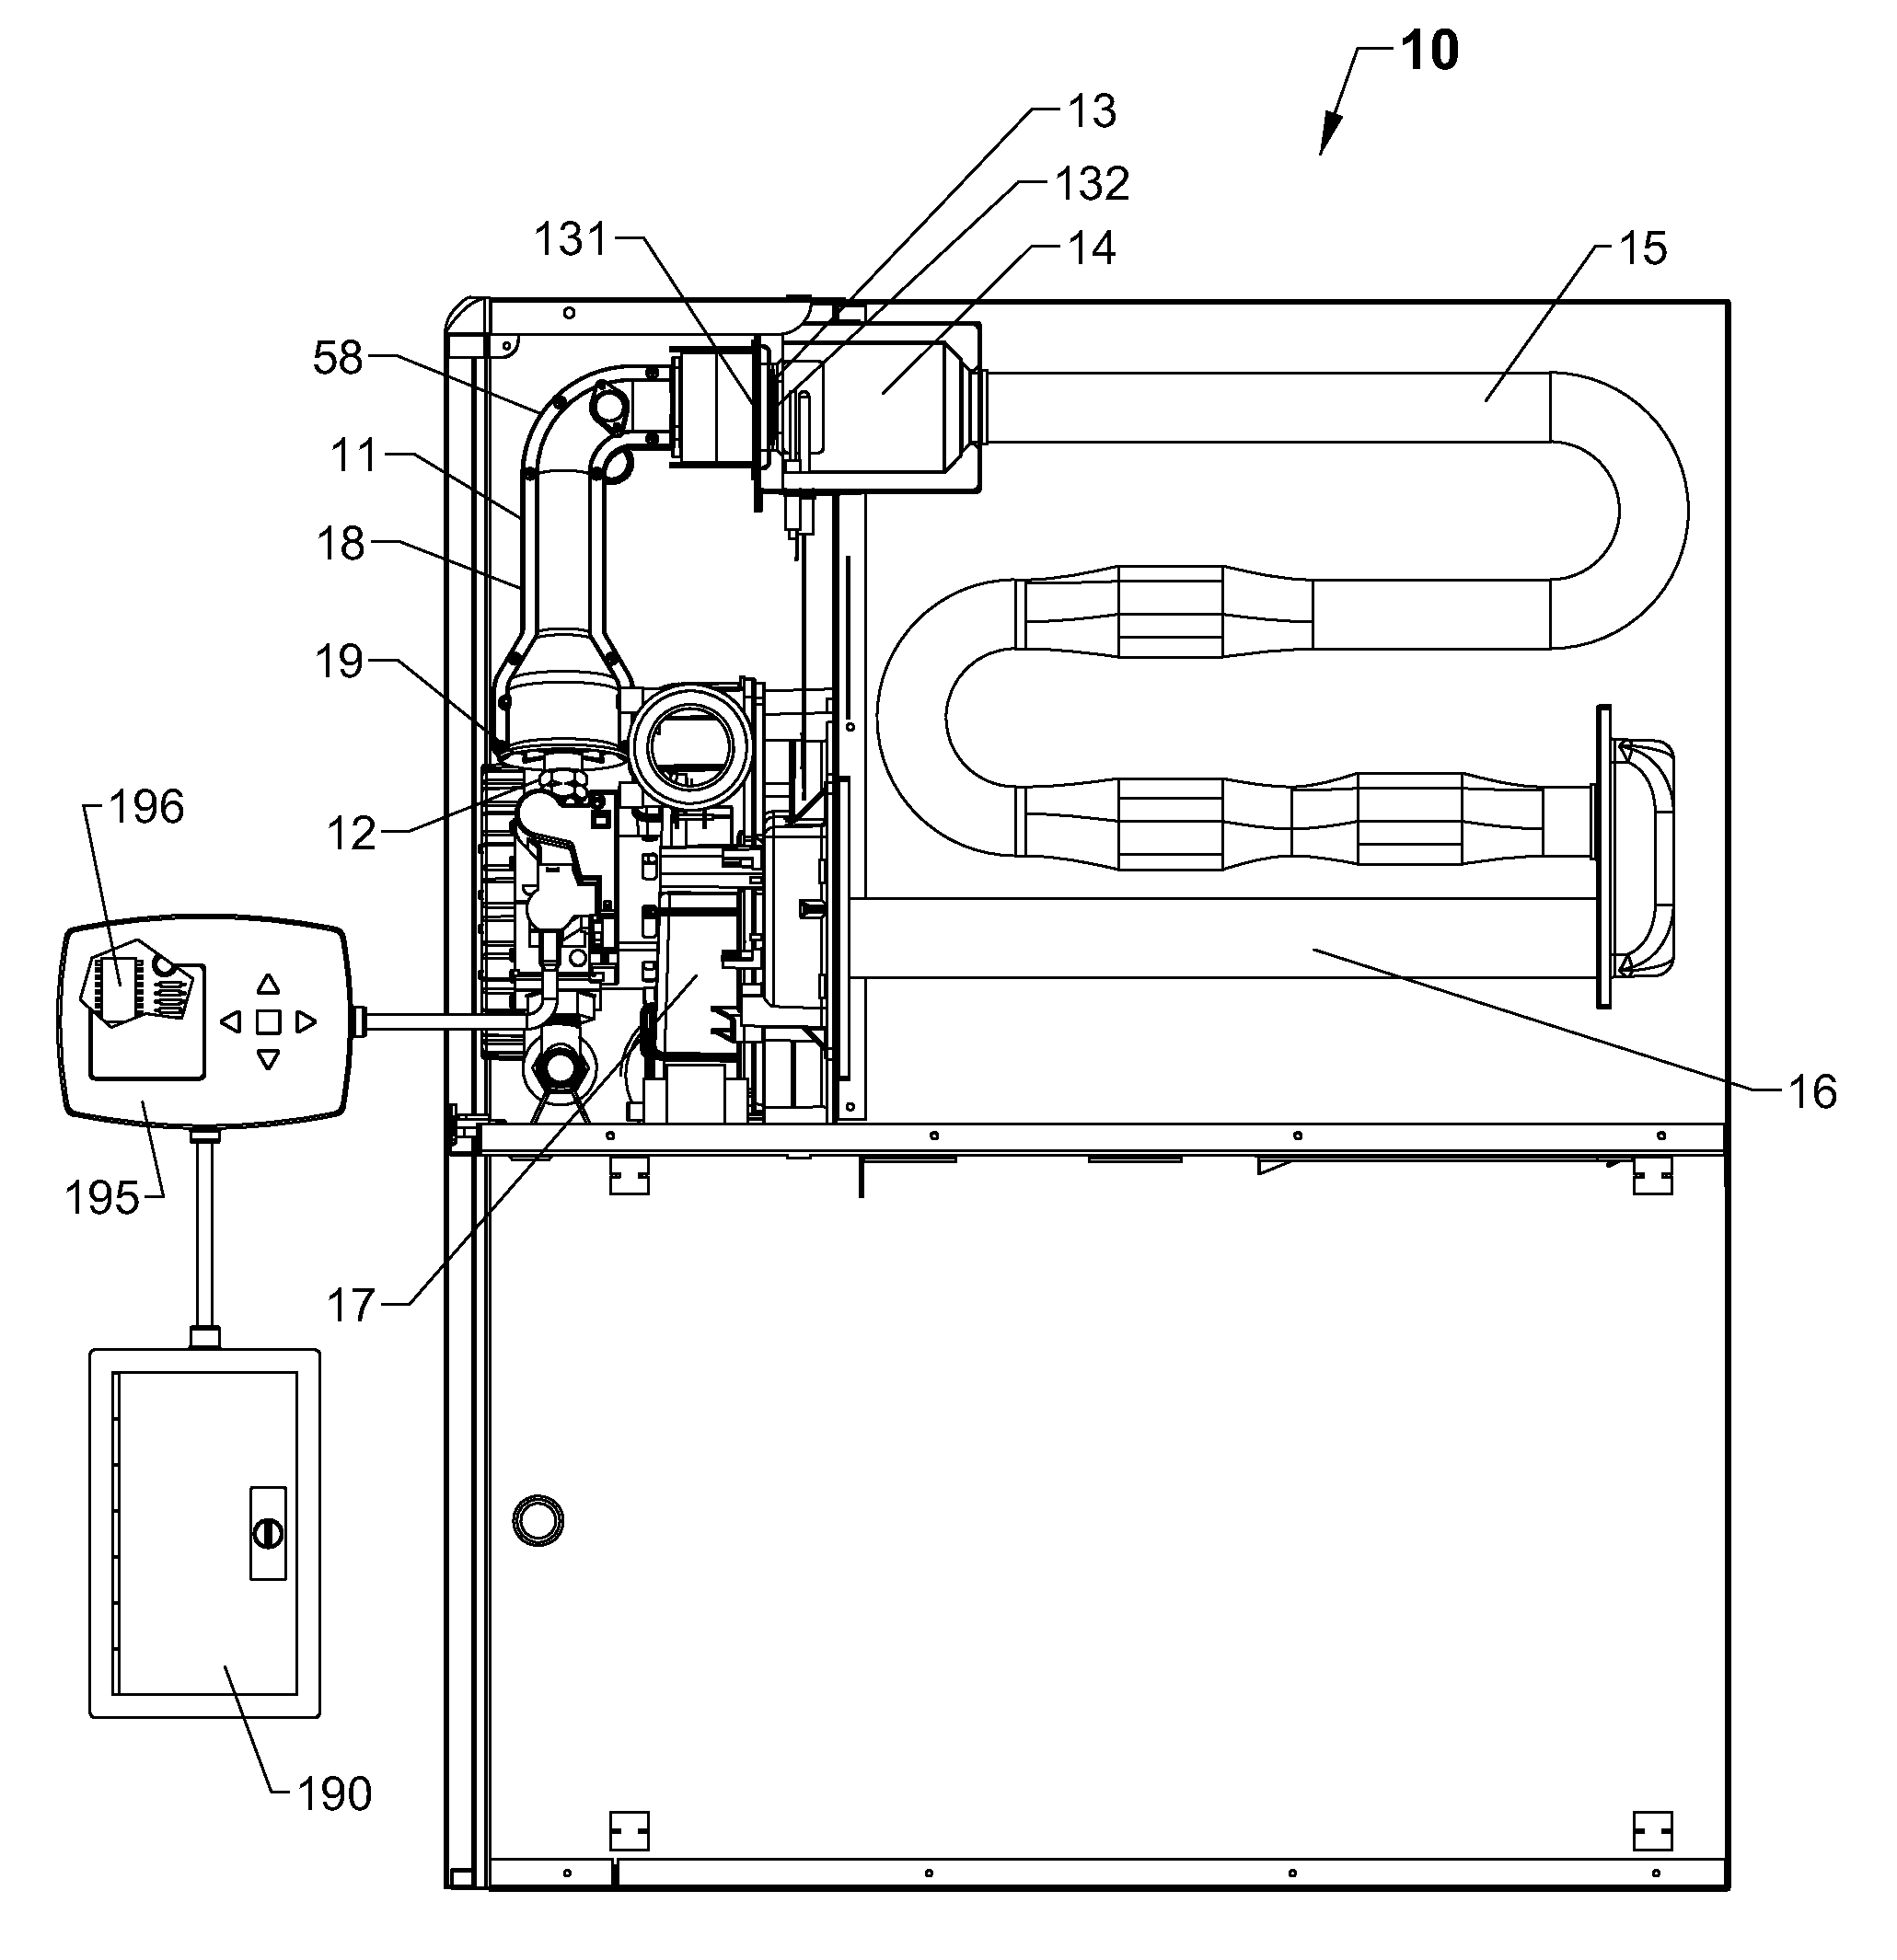 Premix furnace and methods of mixing air and fuel and improving combustion stability